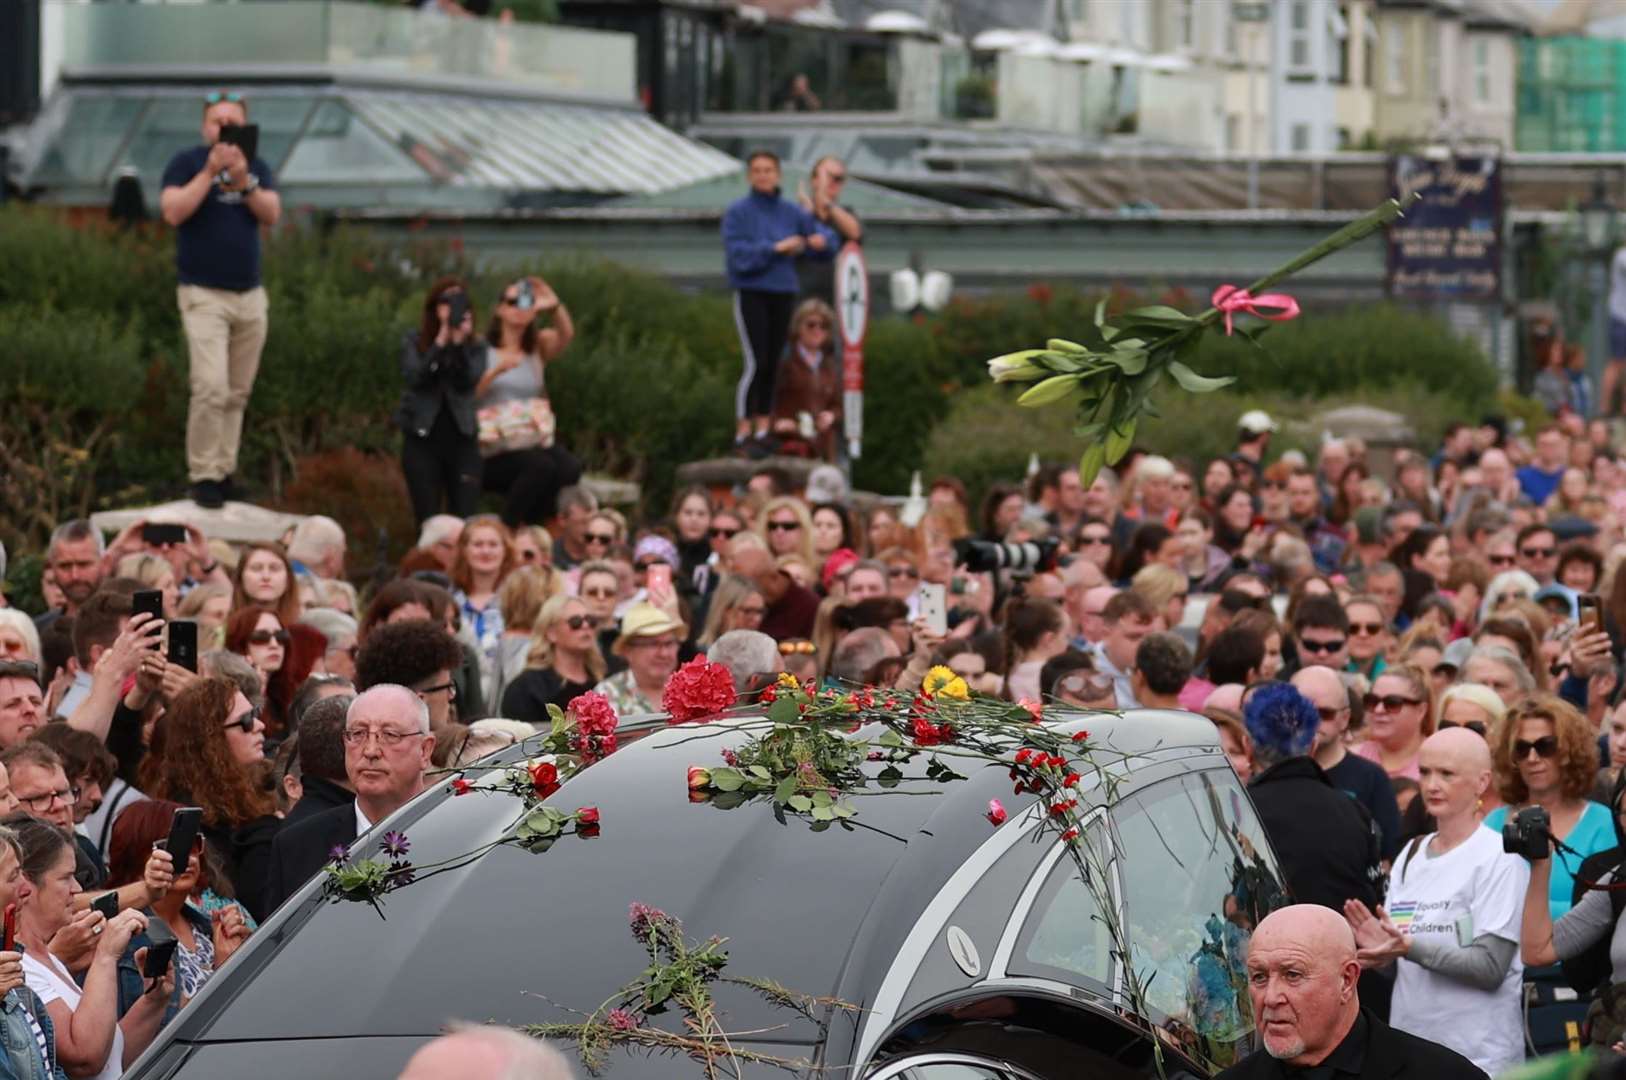 Fans of singer Sinead O’Connor throw flowers on her hearse (Liam McBurney/PA)